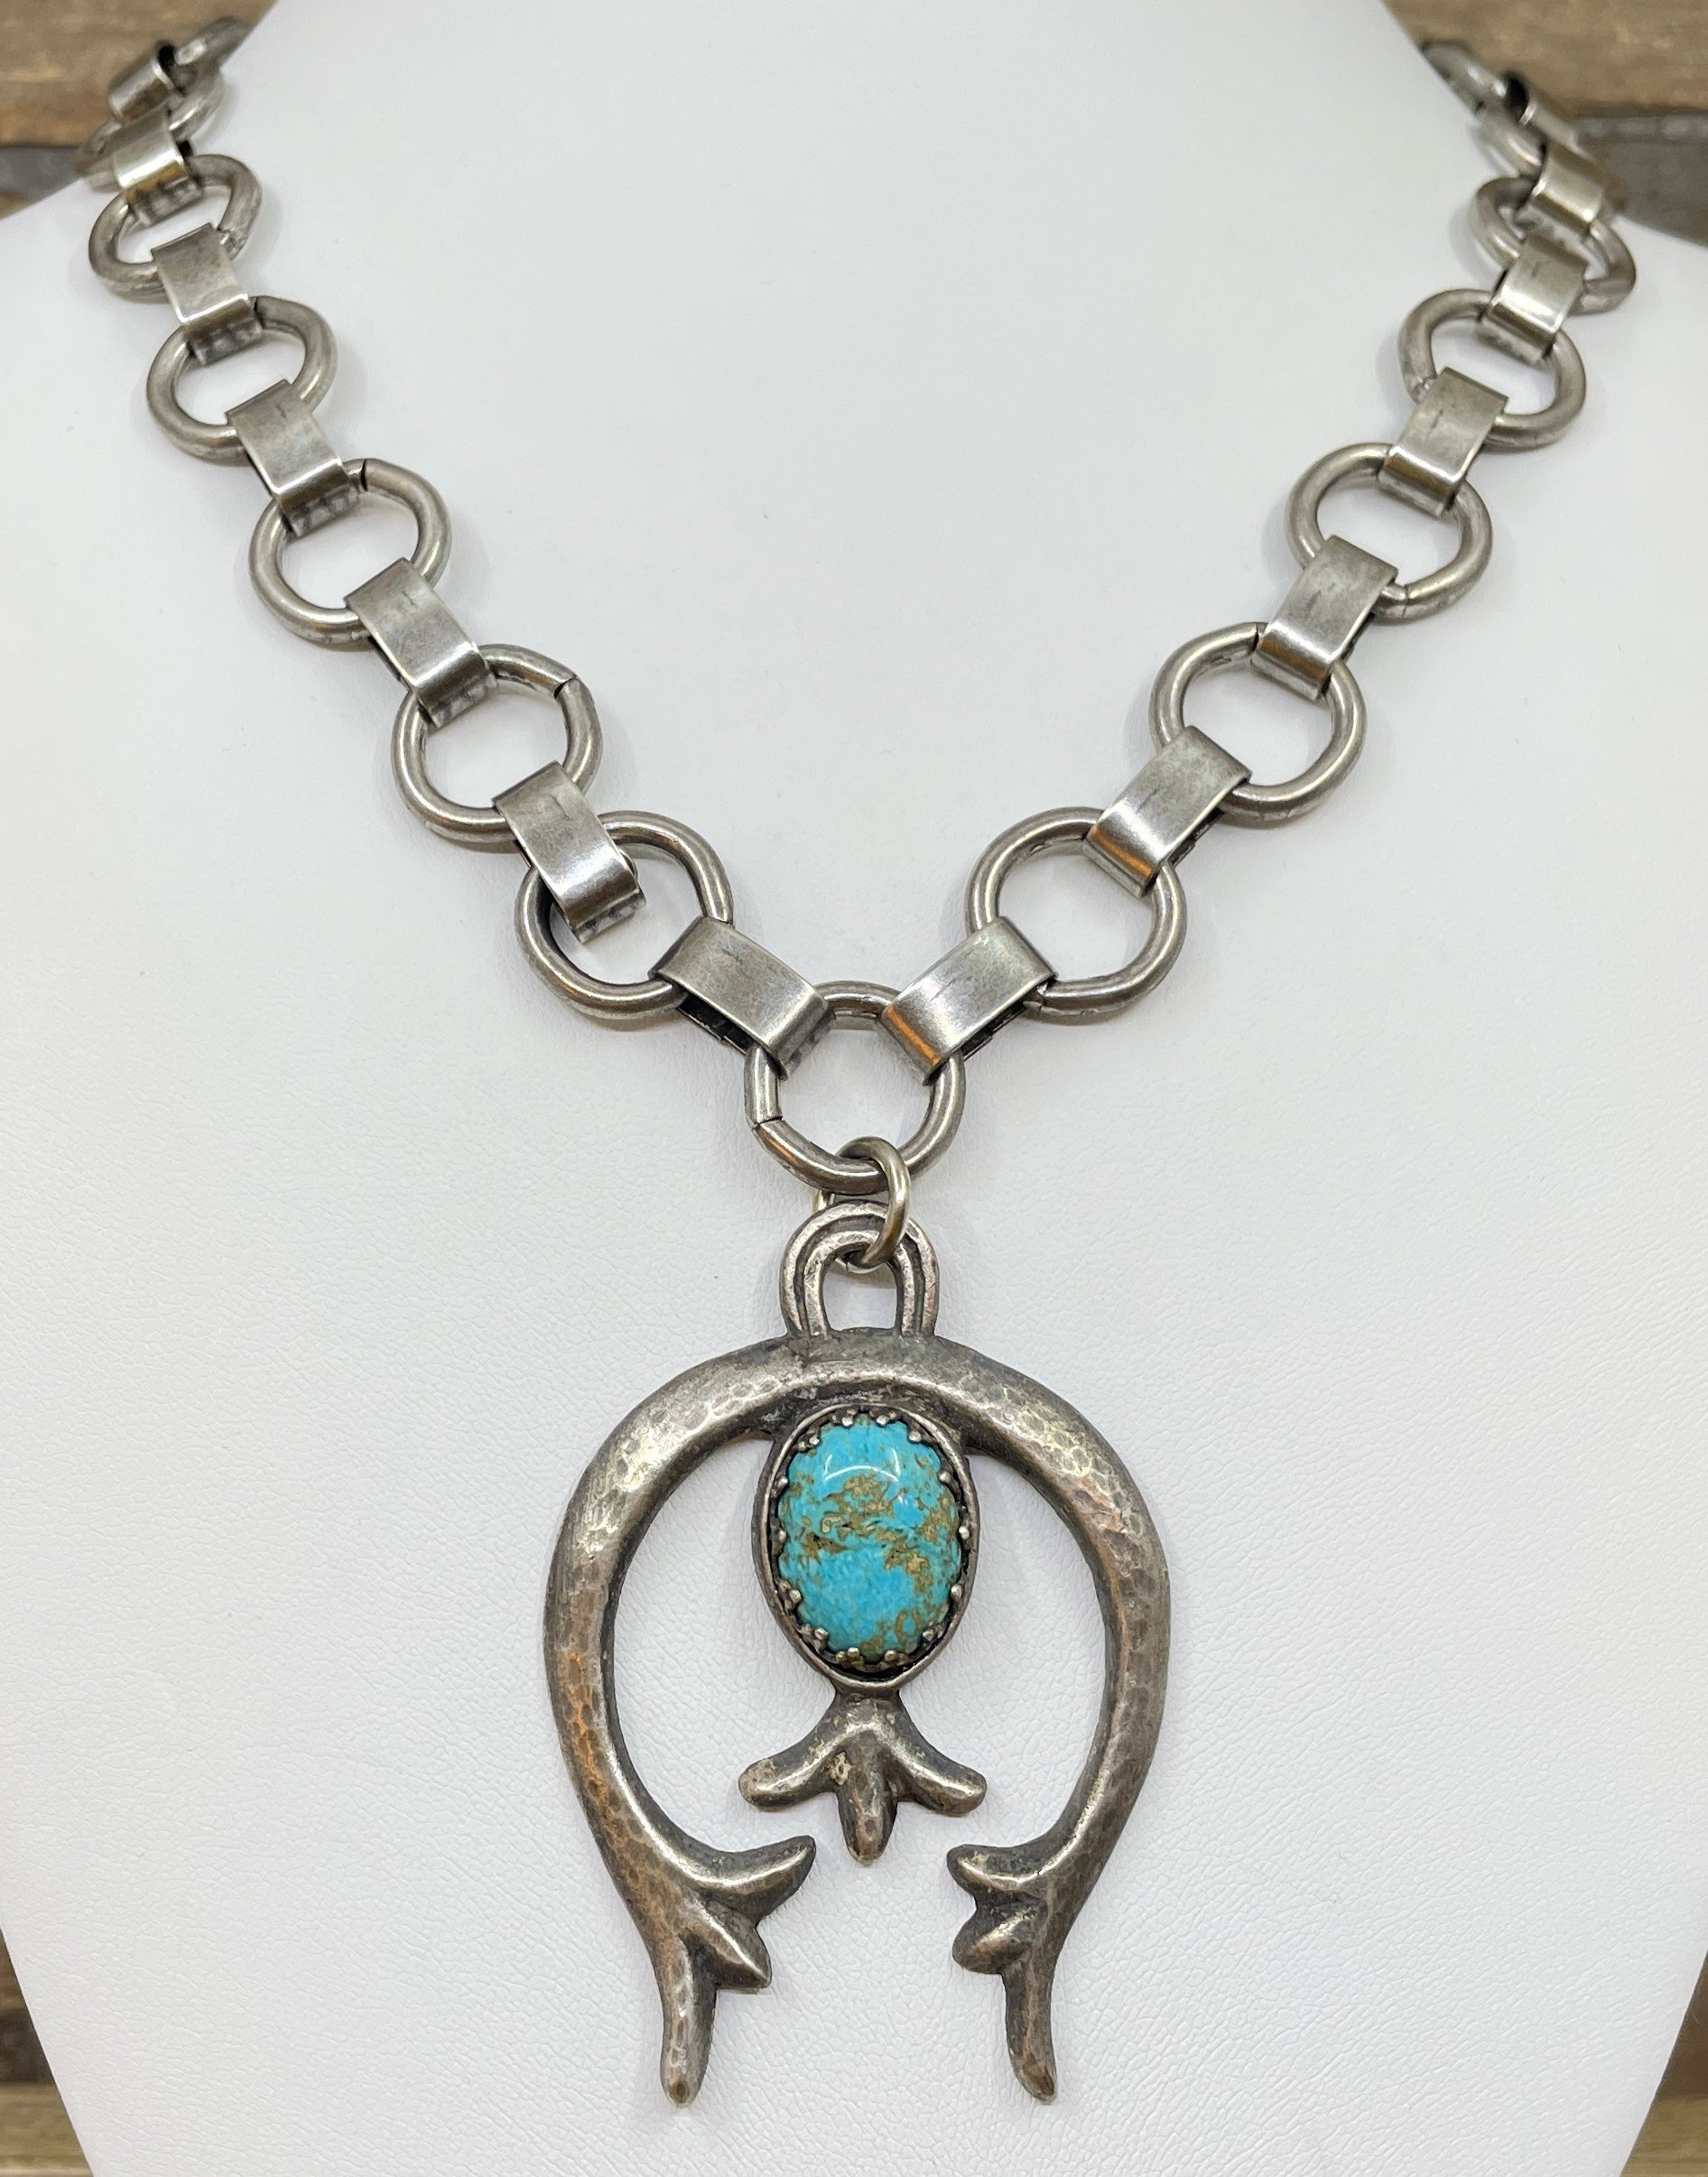 Sterling Silver Pendant With Turquoise Stone Necklace